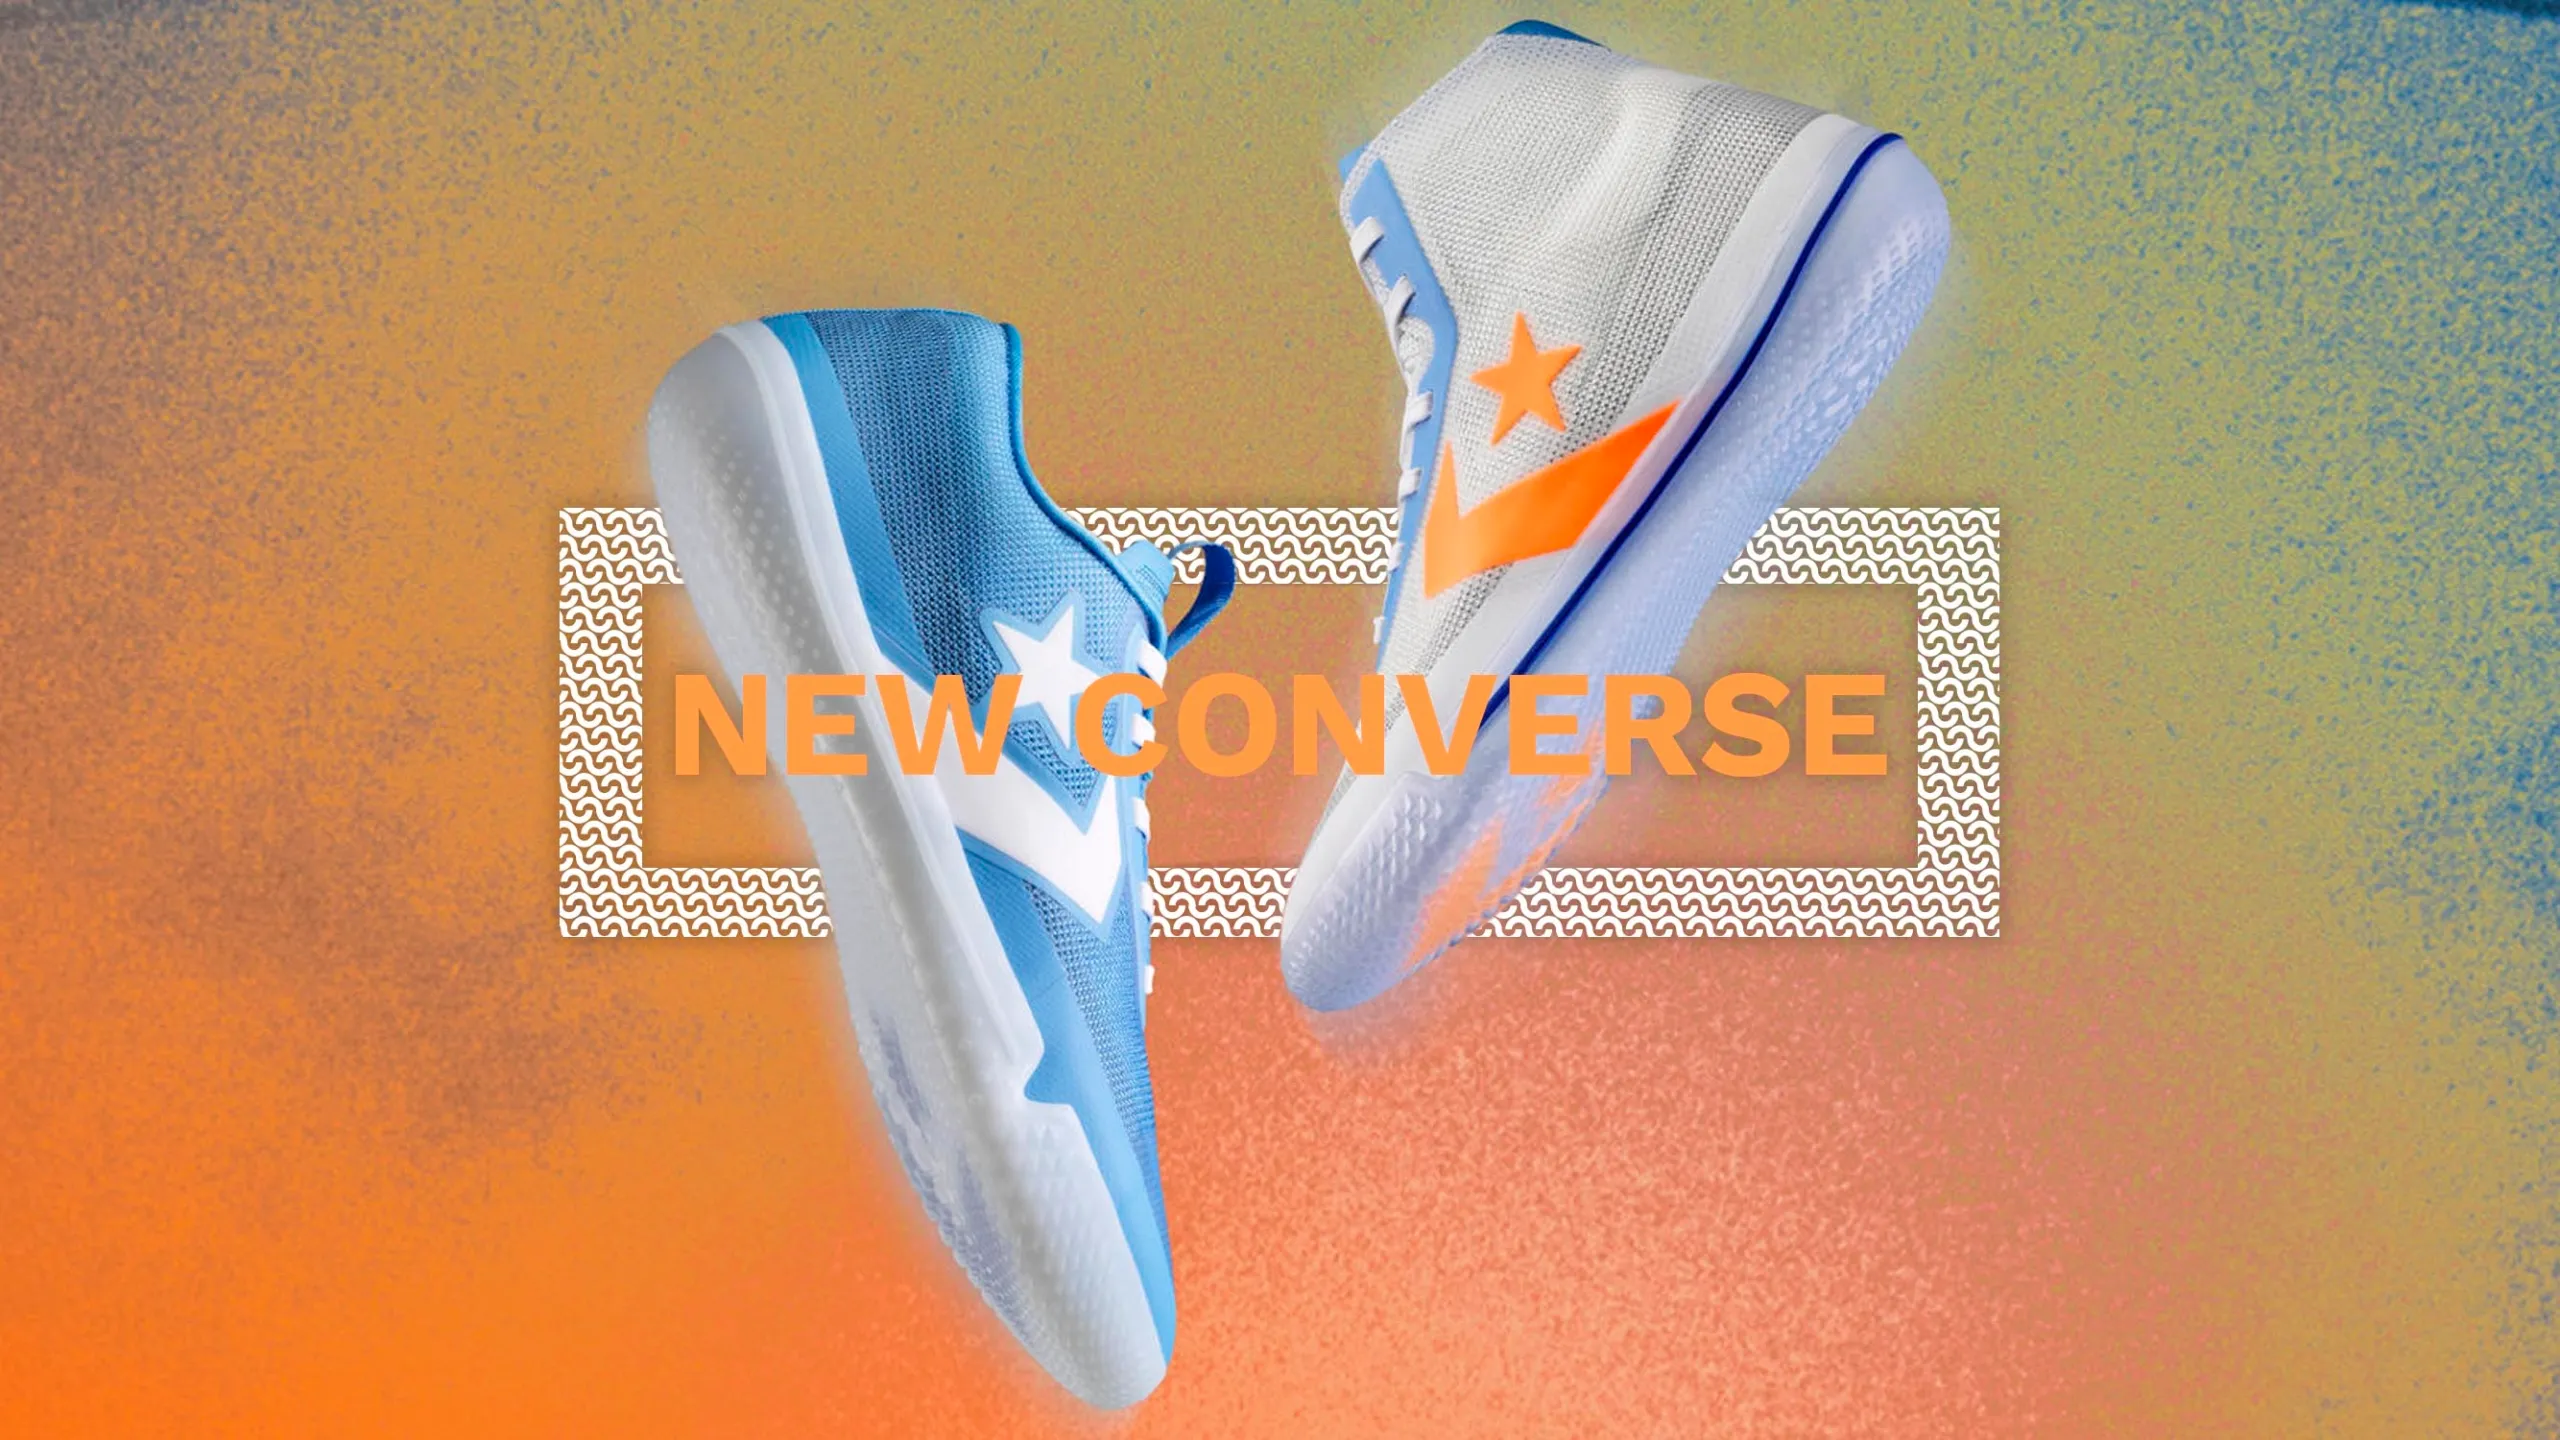 10 New Converse Releases That You Don't Want To Overlook | The Sole ...